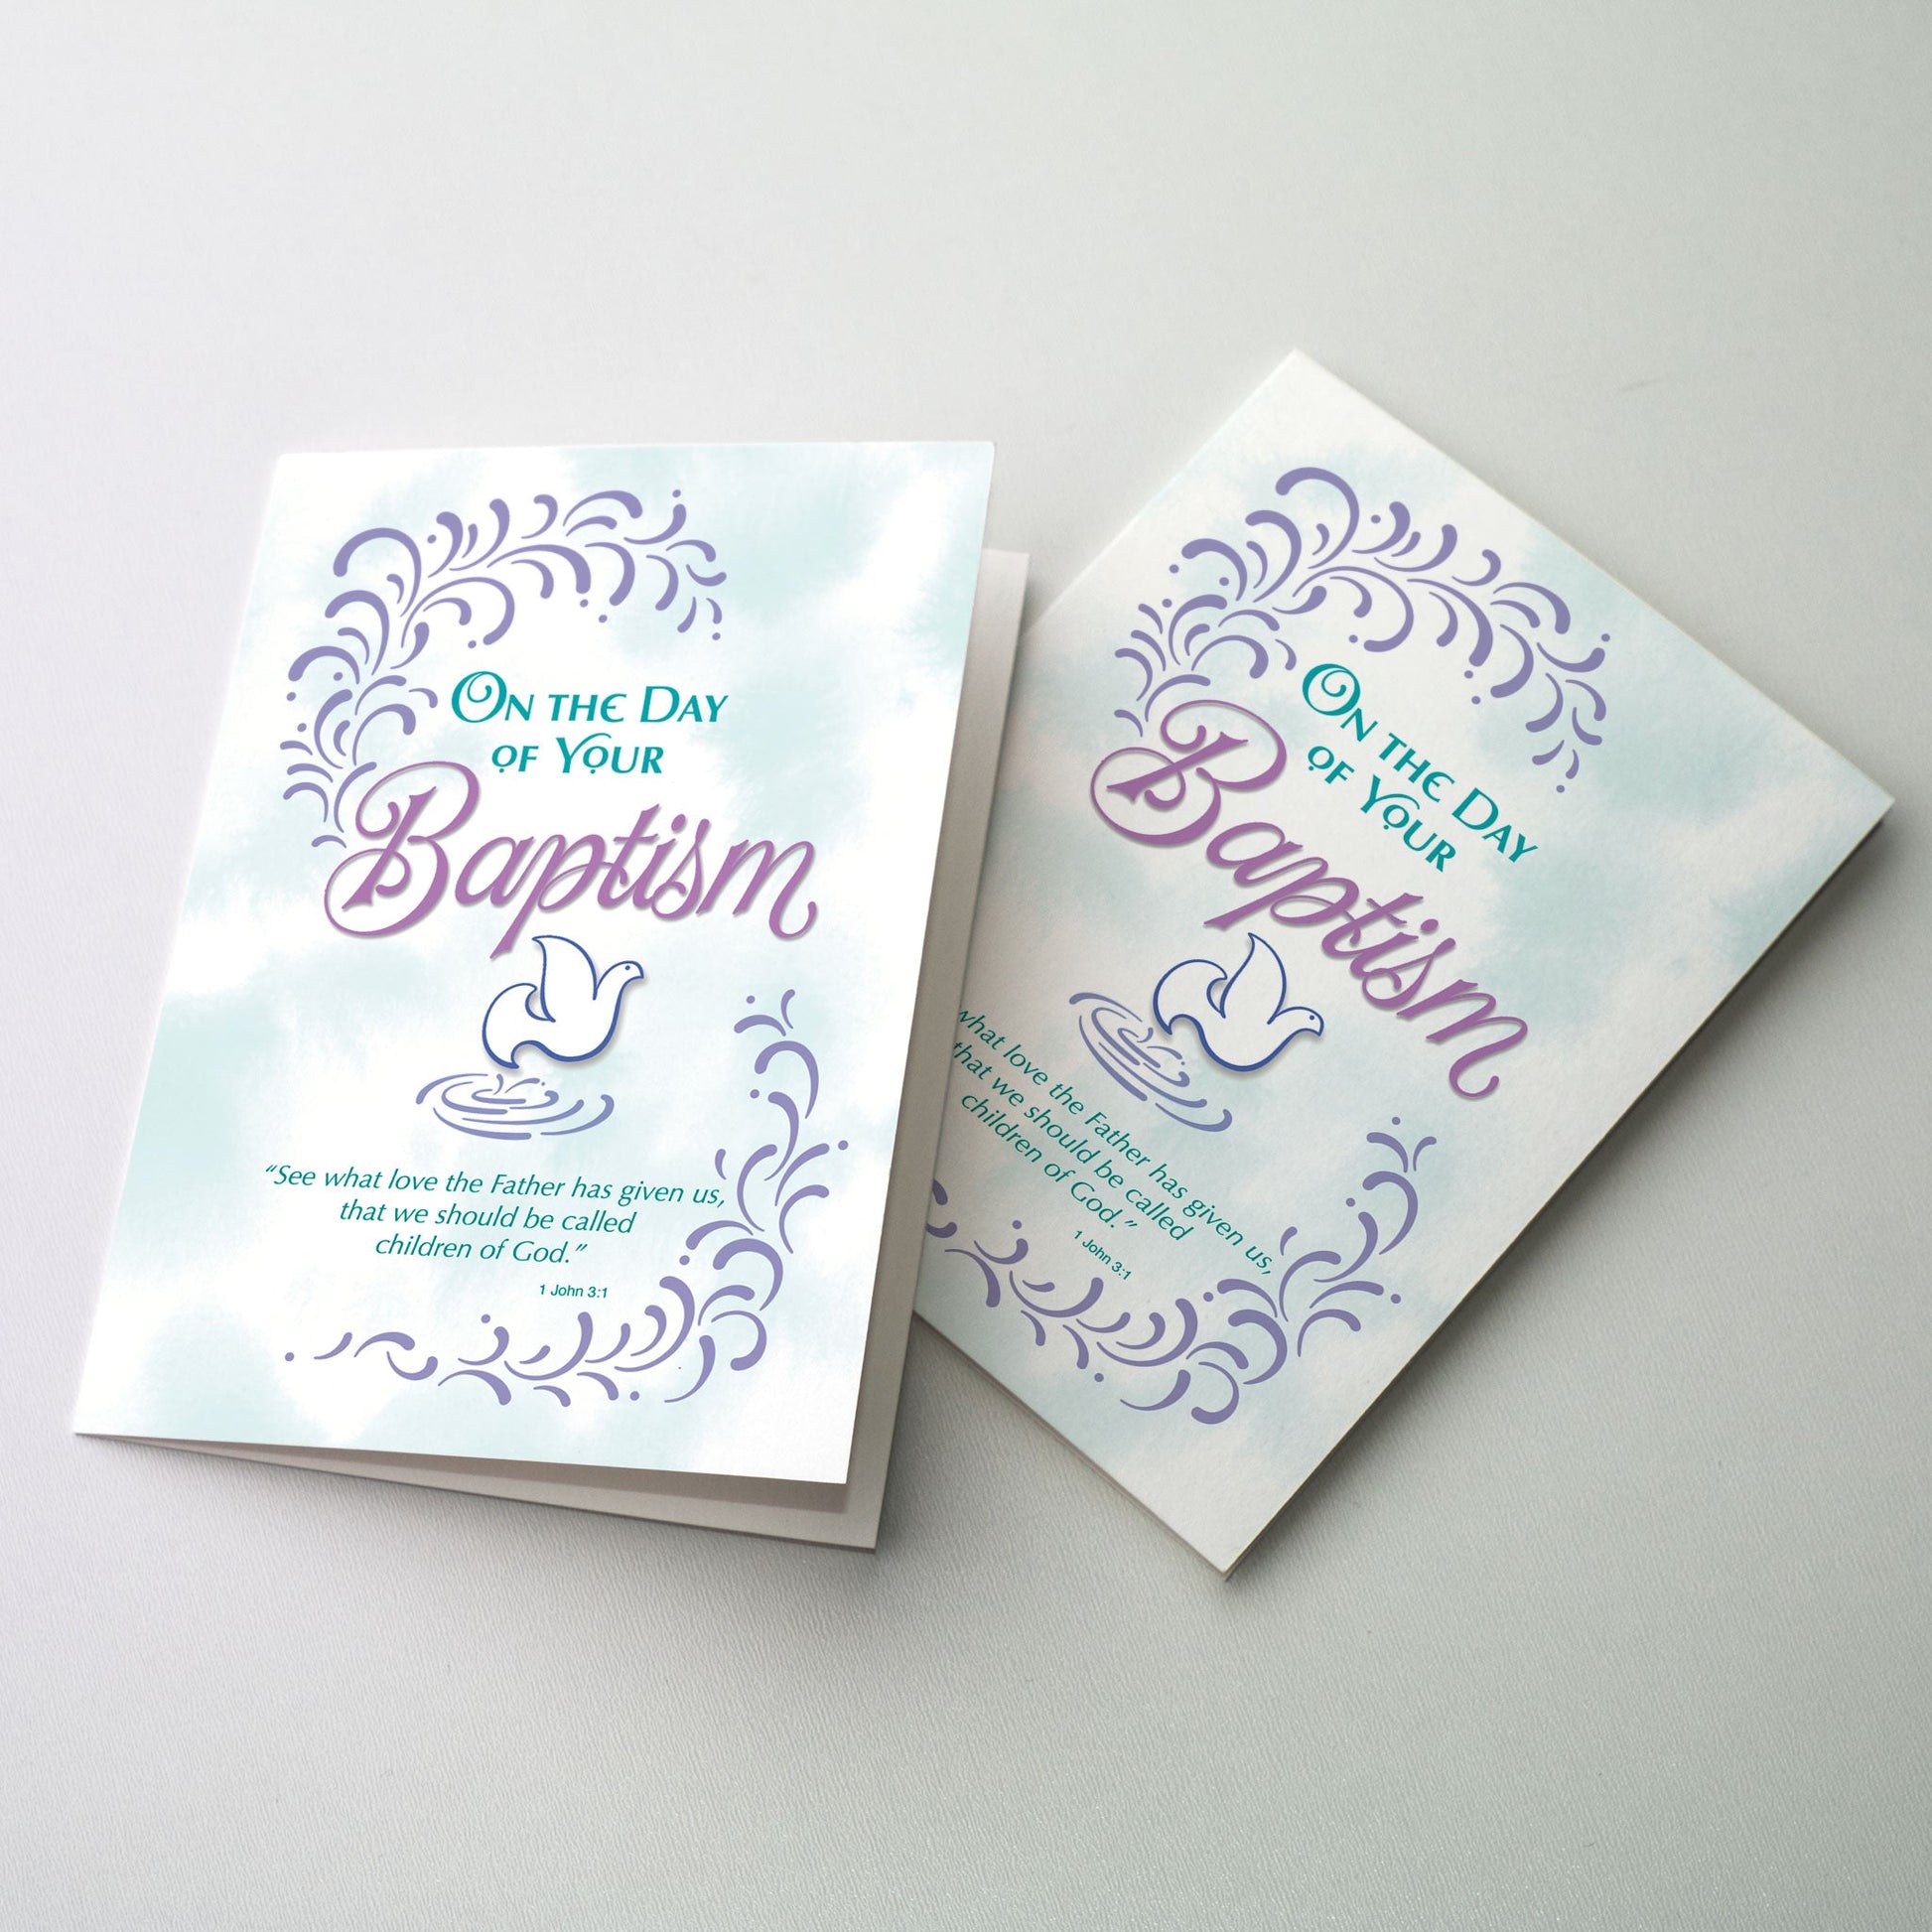 Rejoice with those becoming children of God in the sacrament of Baptism. 5&quot; by 7&quot;. Envelopes included.